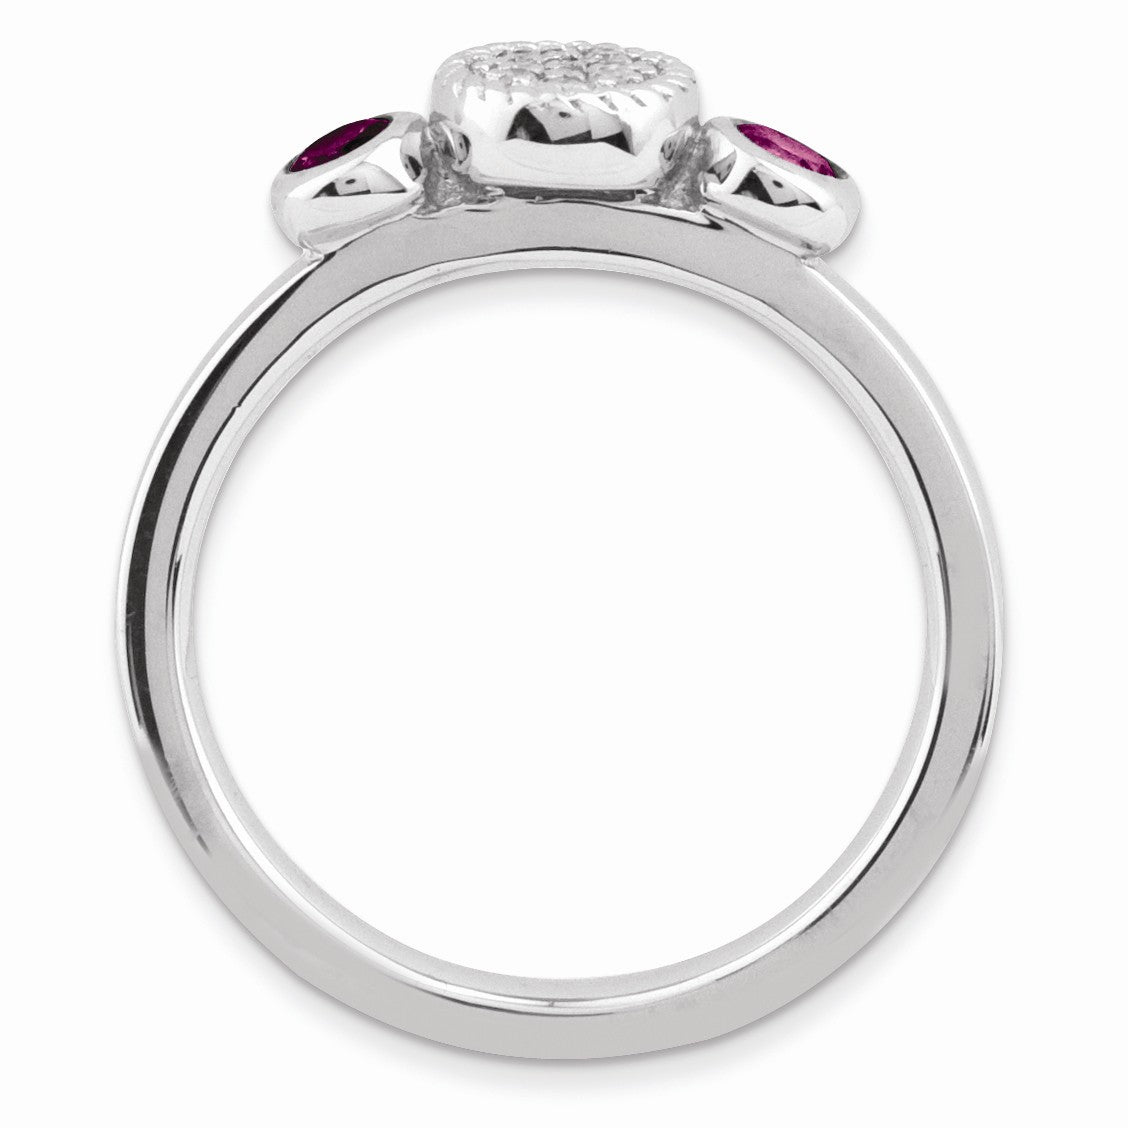 Alternate view of the Sterling Silver Stackable Rhodolite Garnet &amp; .05Ctw HI/I3 Diamond Ring by The Black Bow Jewelry Co.